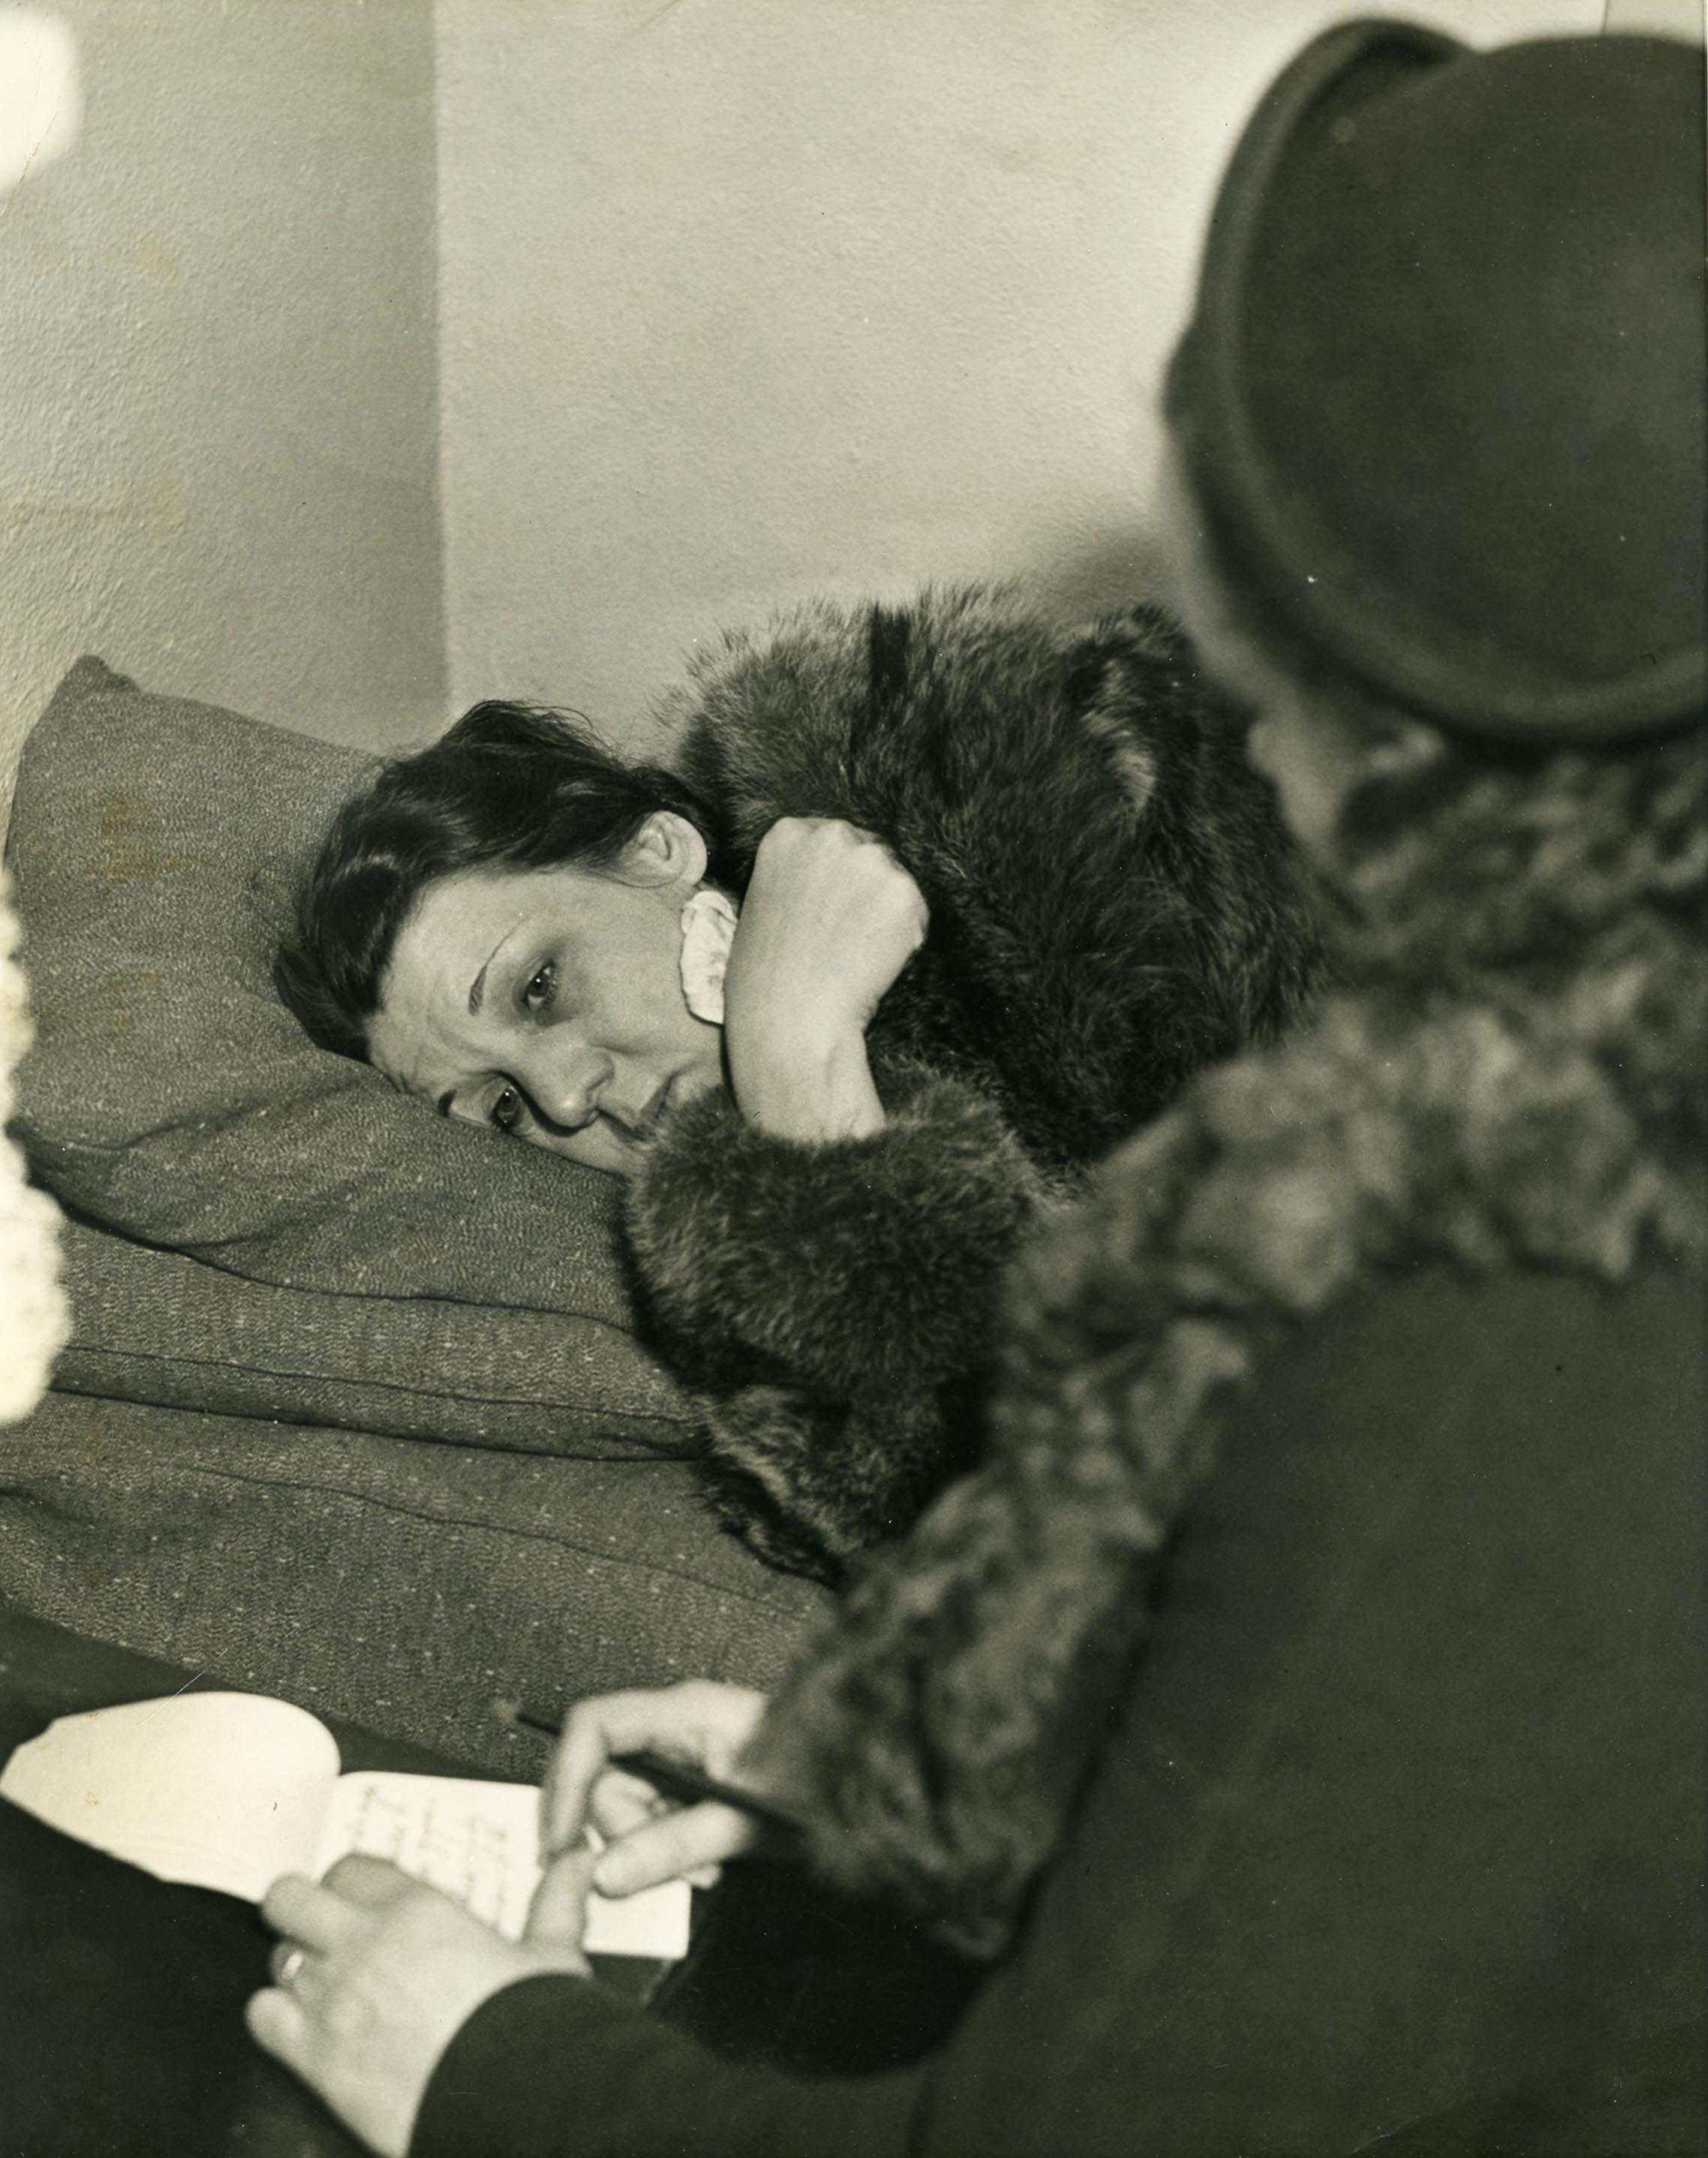 Helen Wills lies on a couch in a fur coat, looking dazed. A reporter sits in the foreground with a notepad.